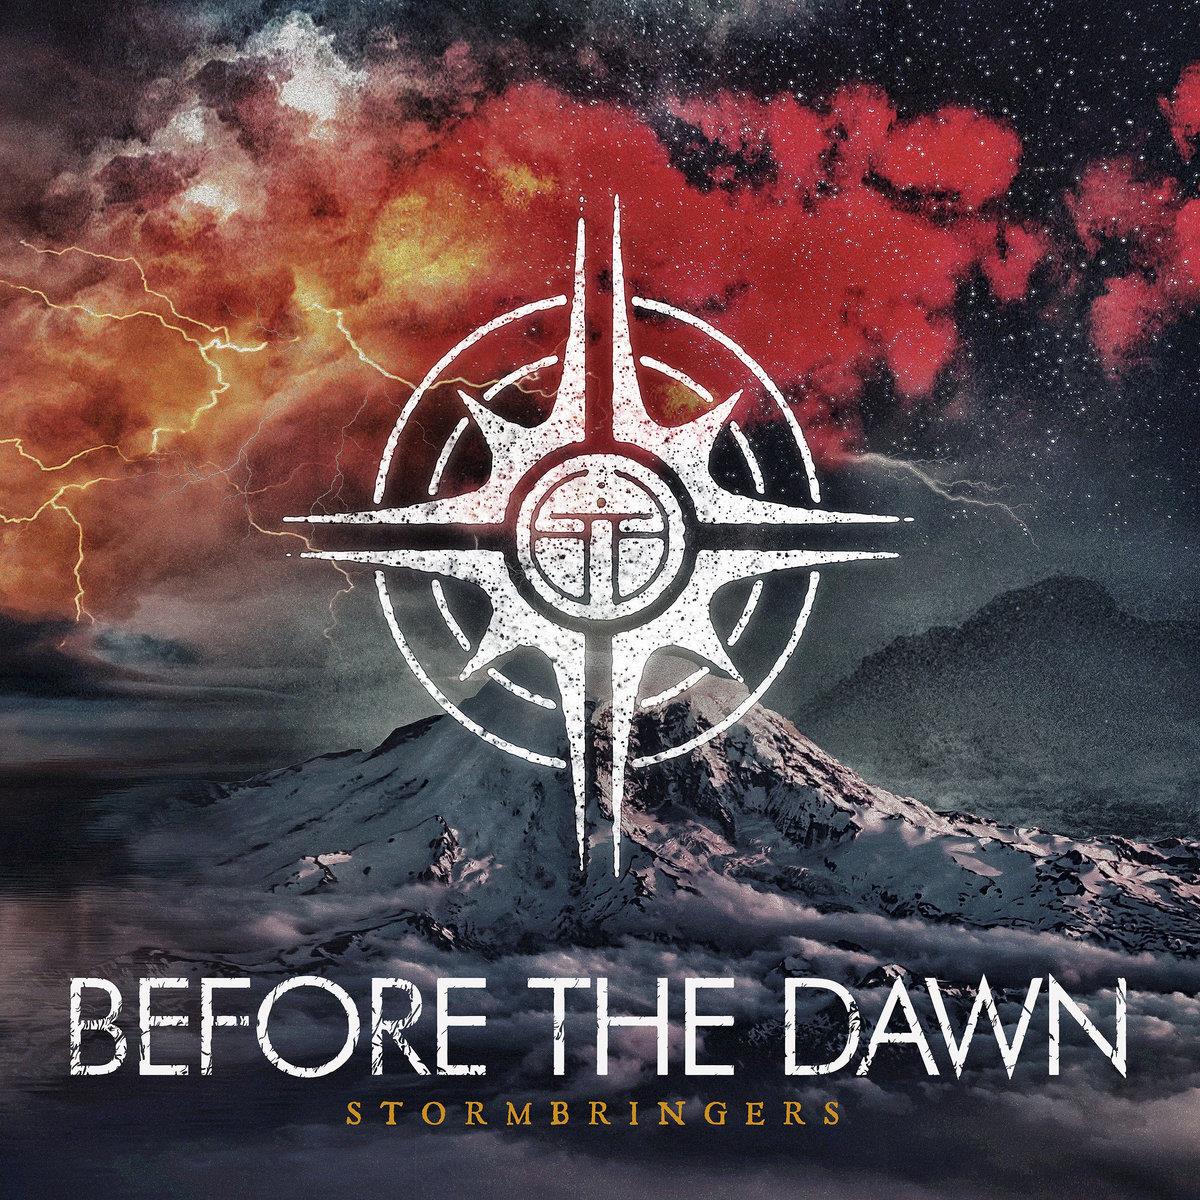 Stormbringers by Before The Dawn (CD)